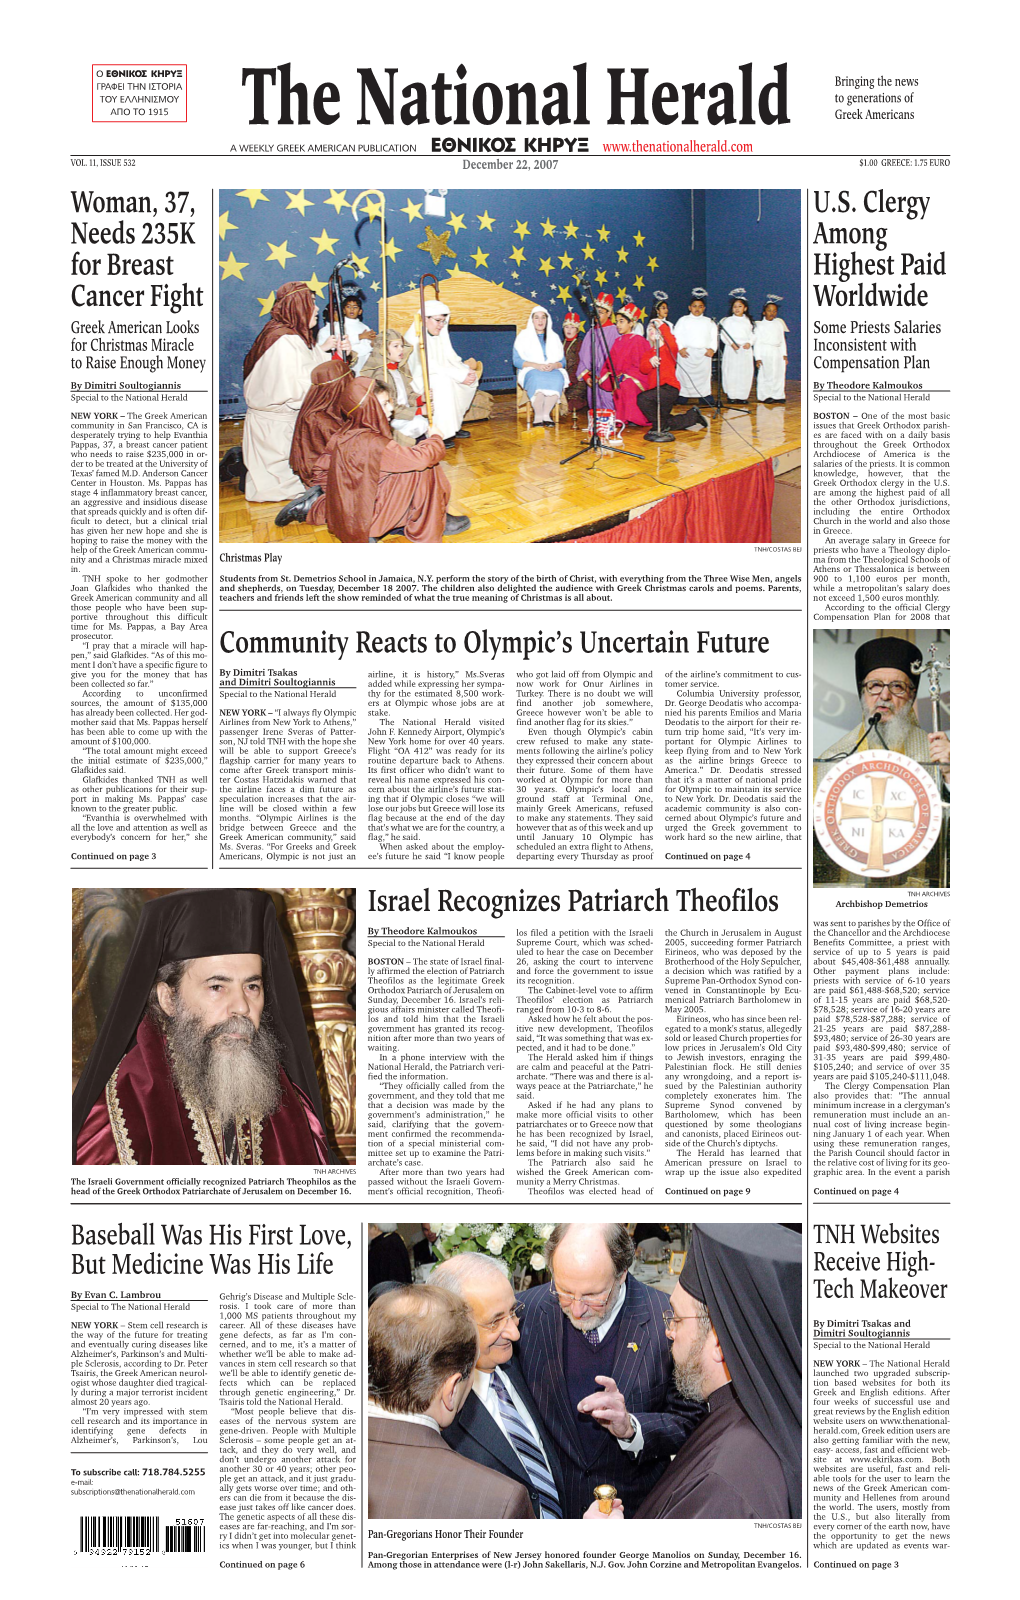 U.S. Clergy Among Highest Paid Worldwide Community Reacts to Olympic's Uncertain Future Israel Recognizes Patriarch Theofilos